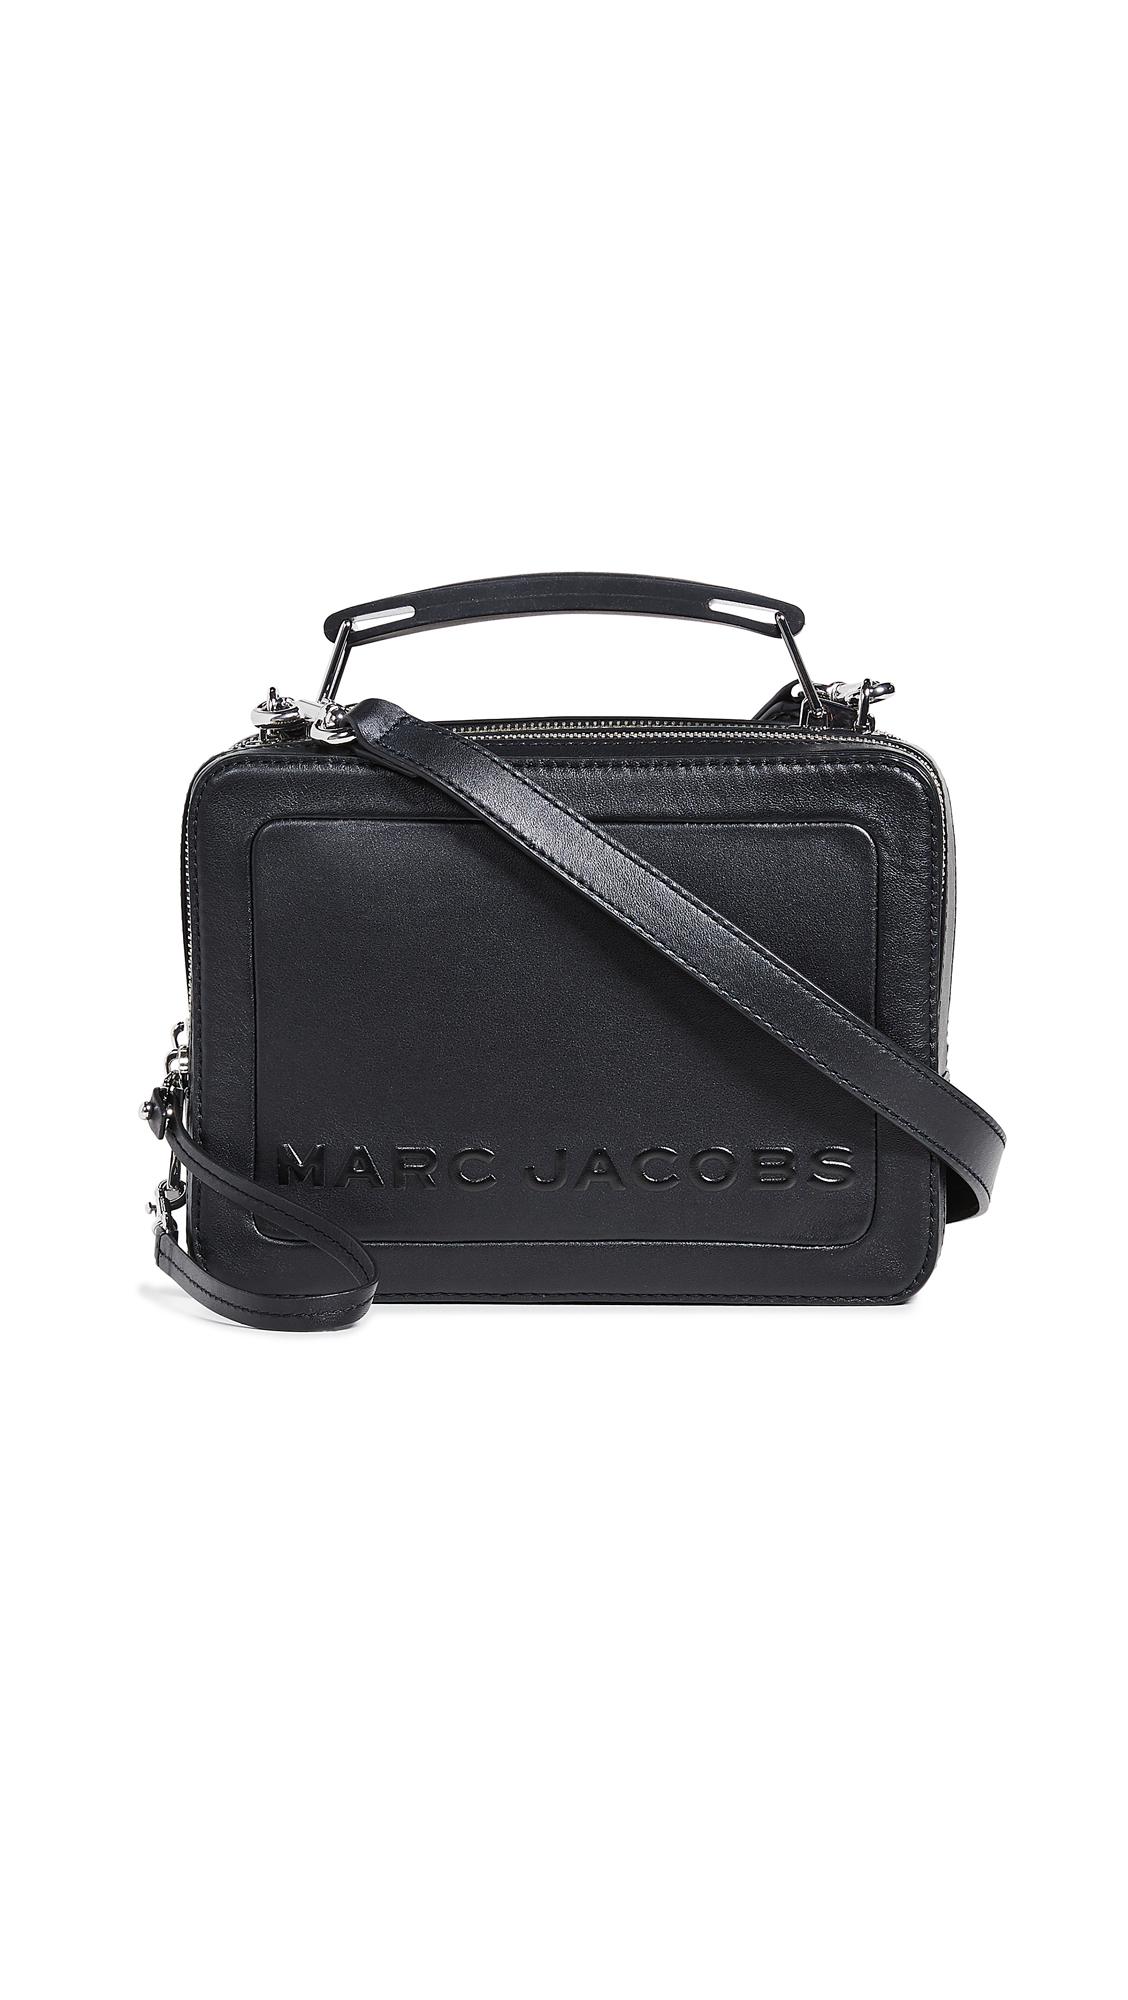 Marc Jacobs The Box 23 Bag in Black | Lyst